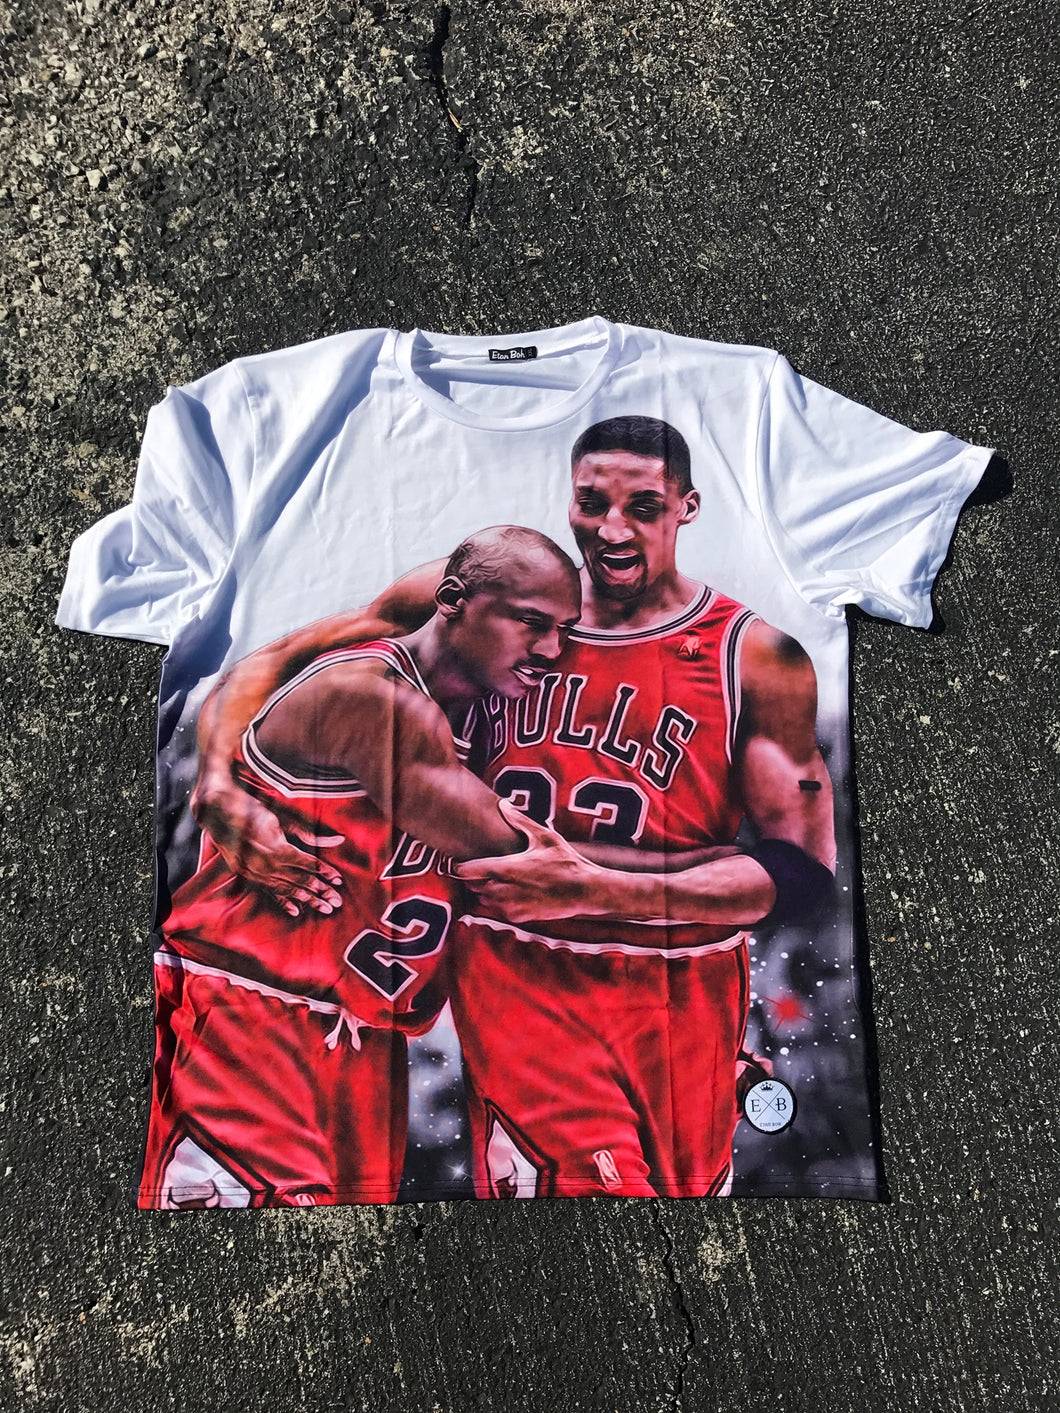 Double sided flu game - white tee